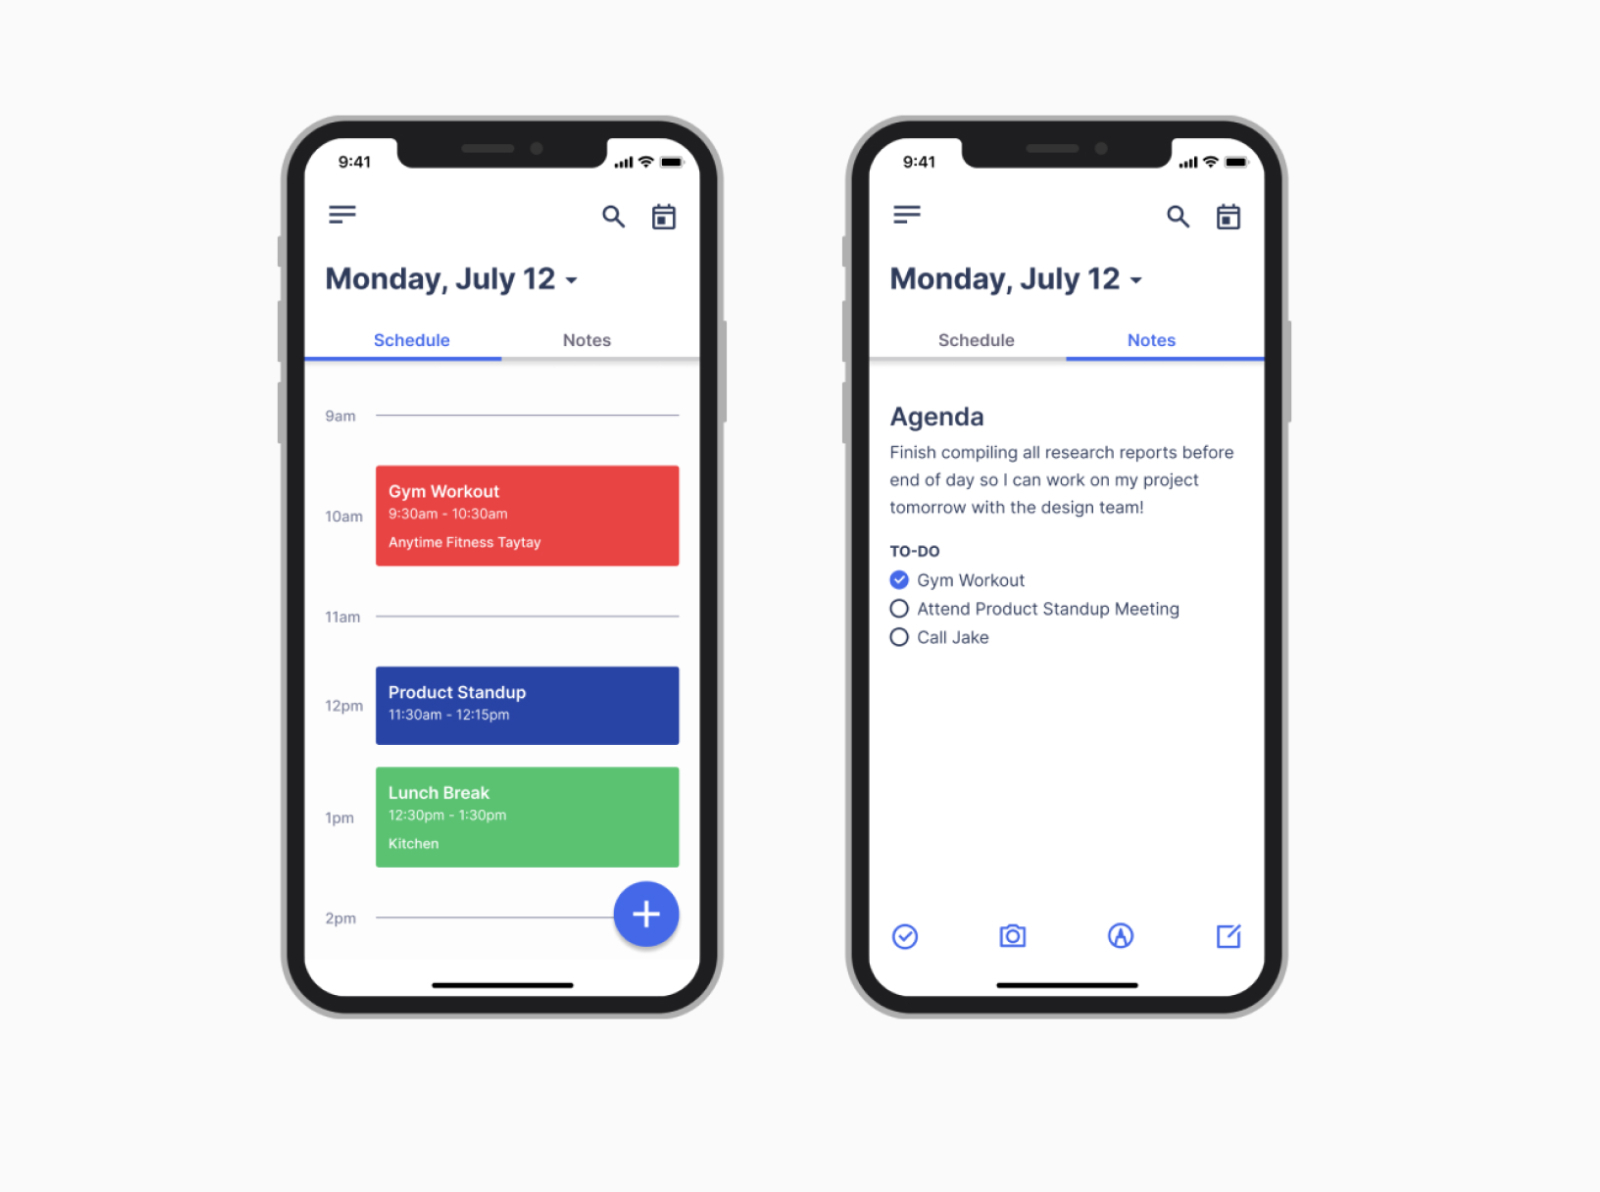 Calendar Note App by Nathan Santos on Dribbble